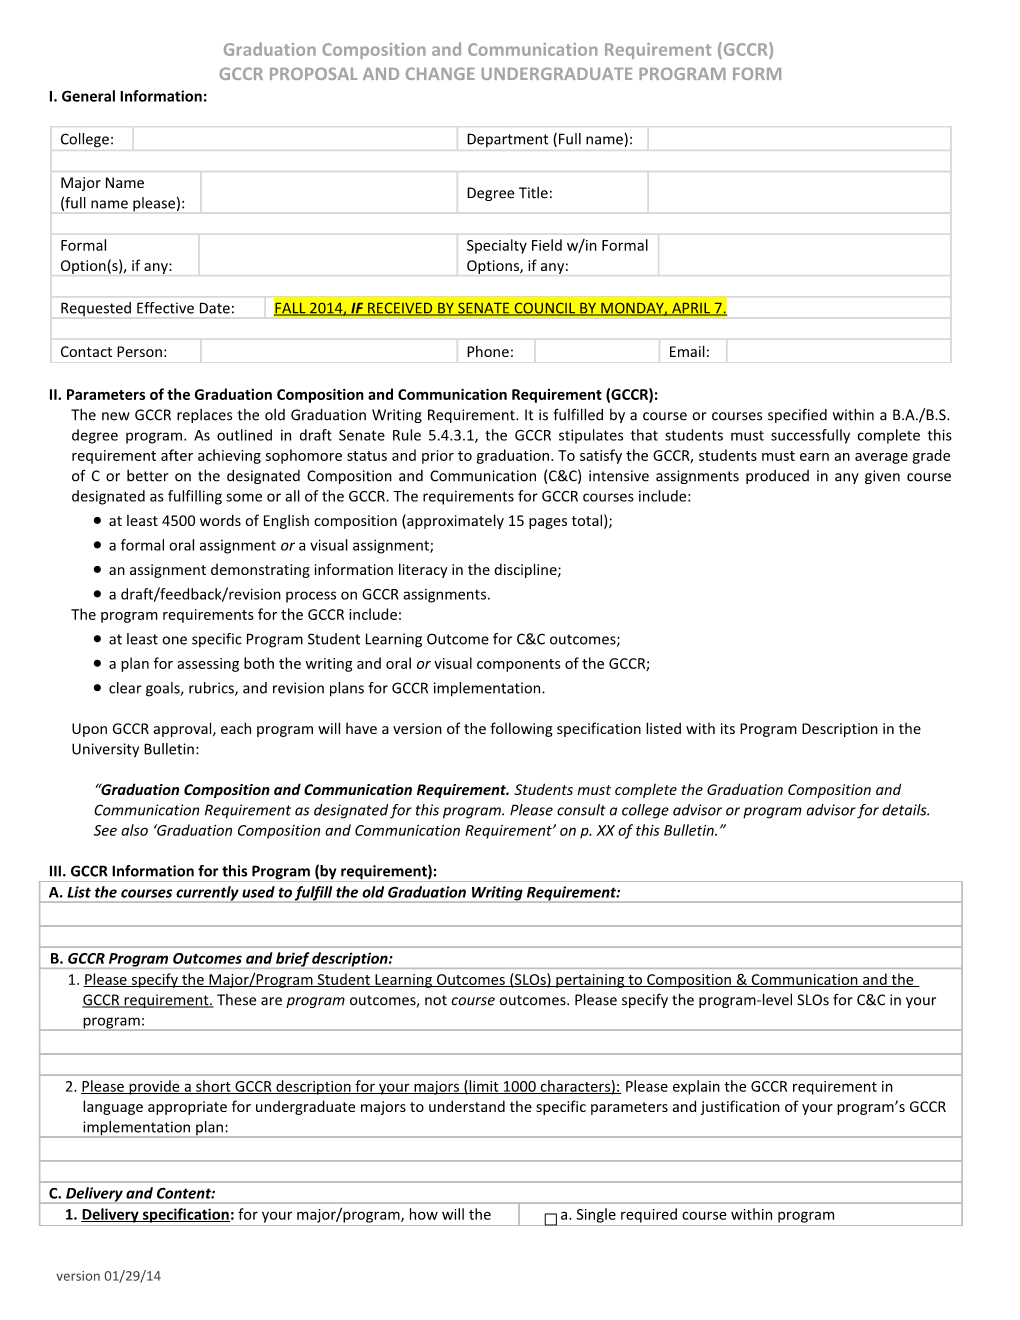 Request for GCCR Proposal Approval and Change in Undergraduate Program